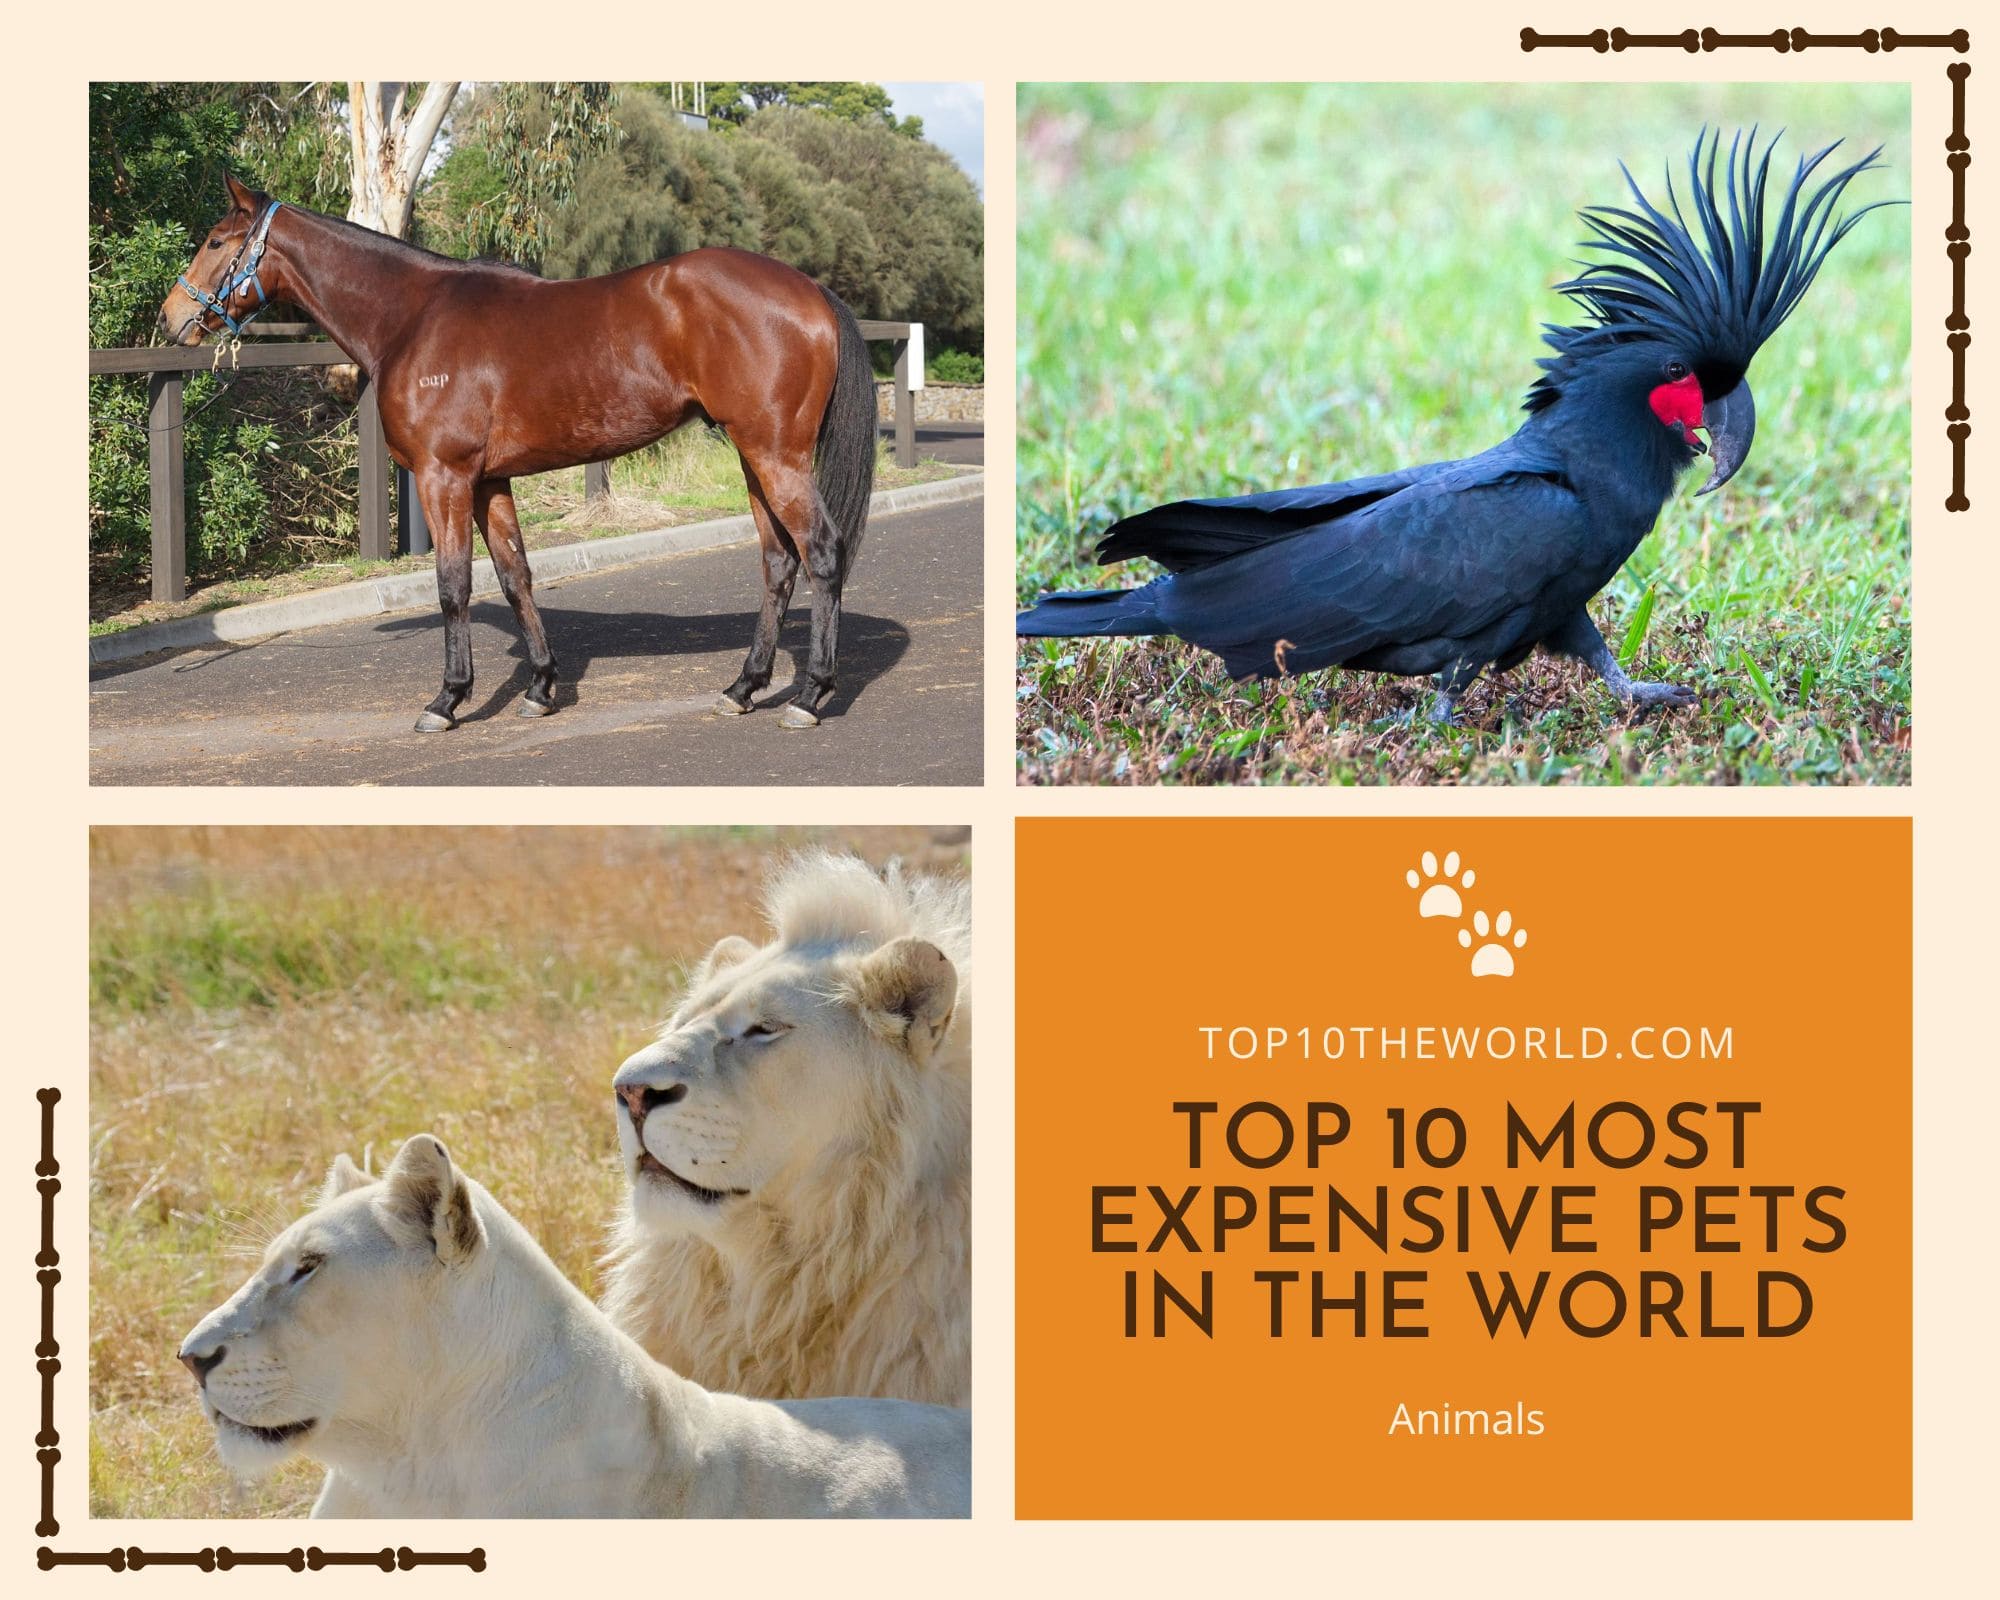 Top 10 Most Expensive Pets in the World